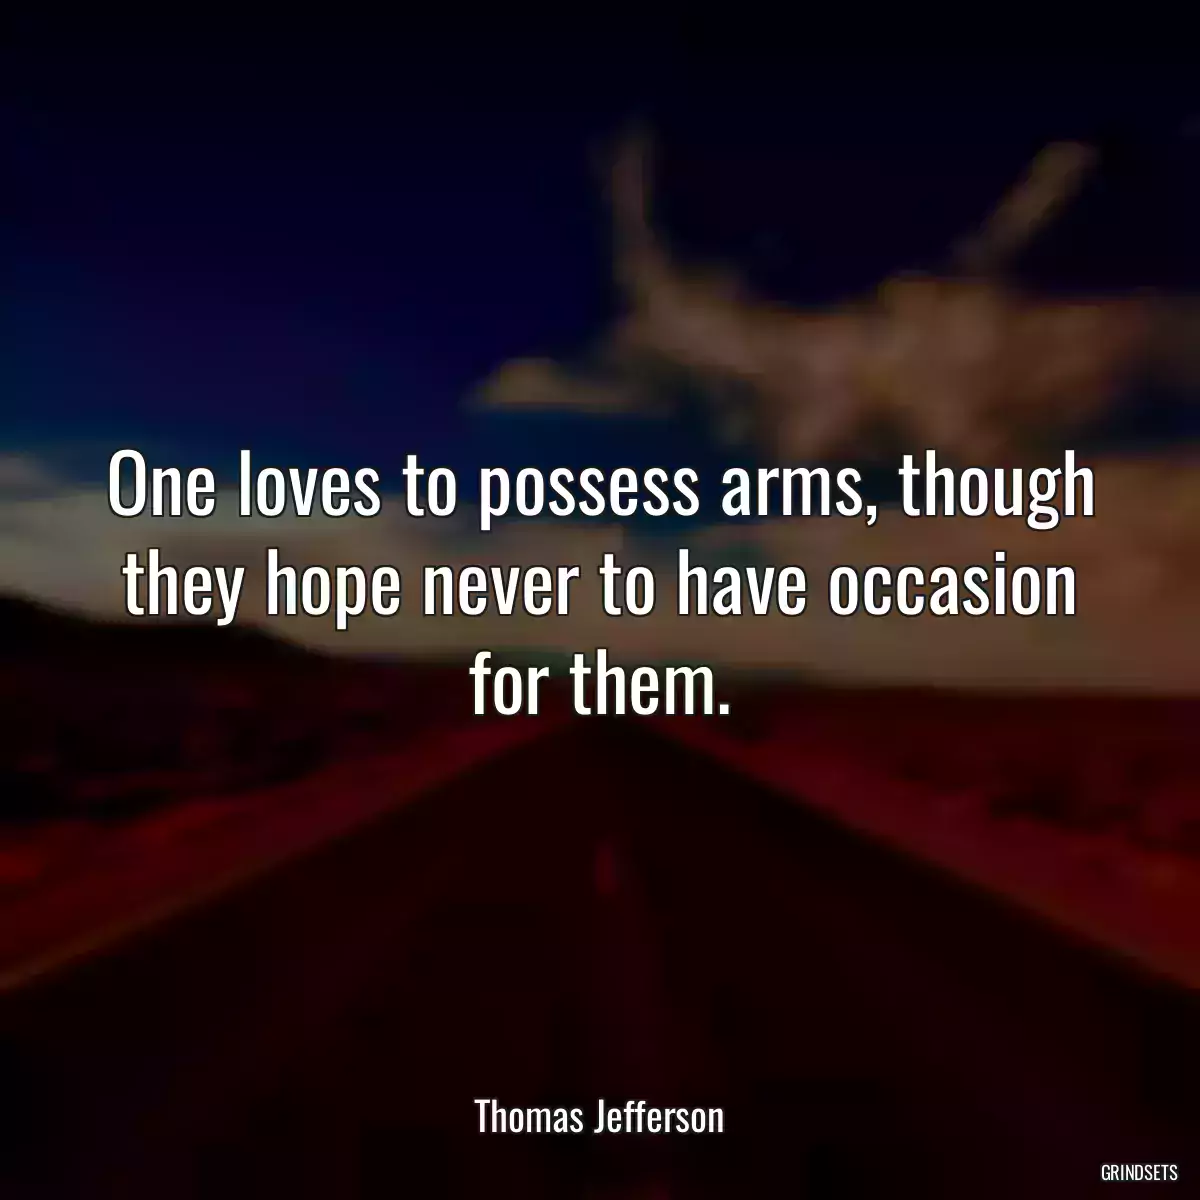 One loves to possess arms, though they hope never to have occasion for them.